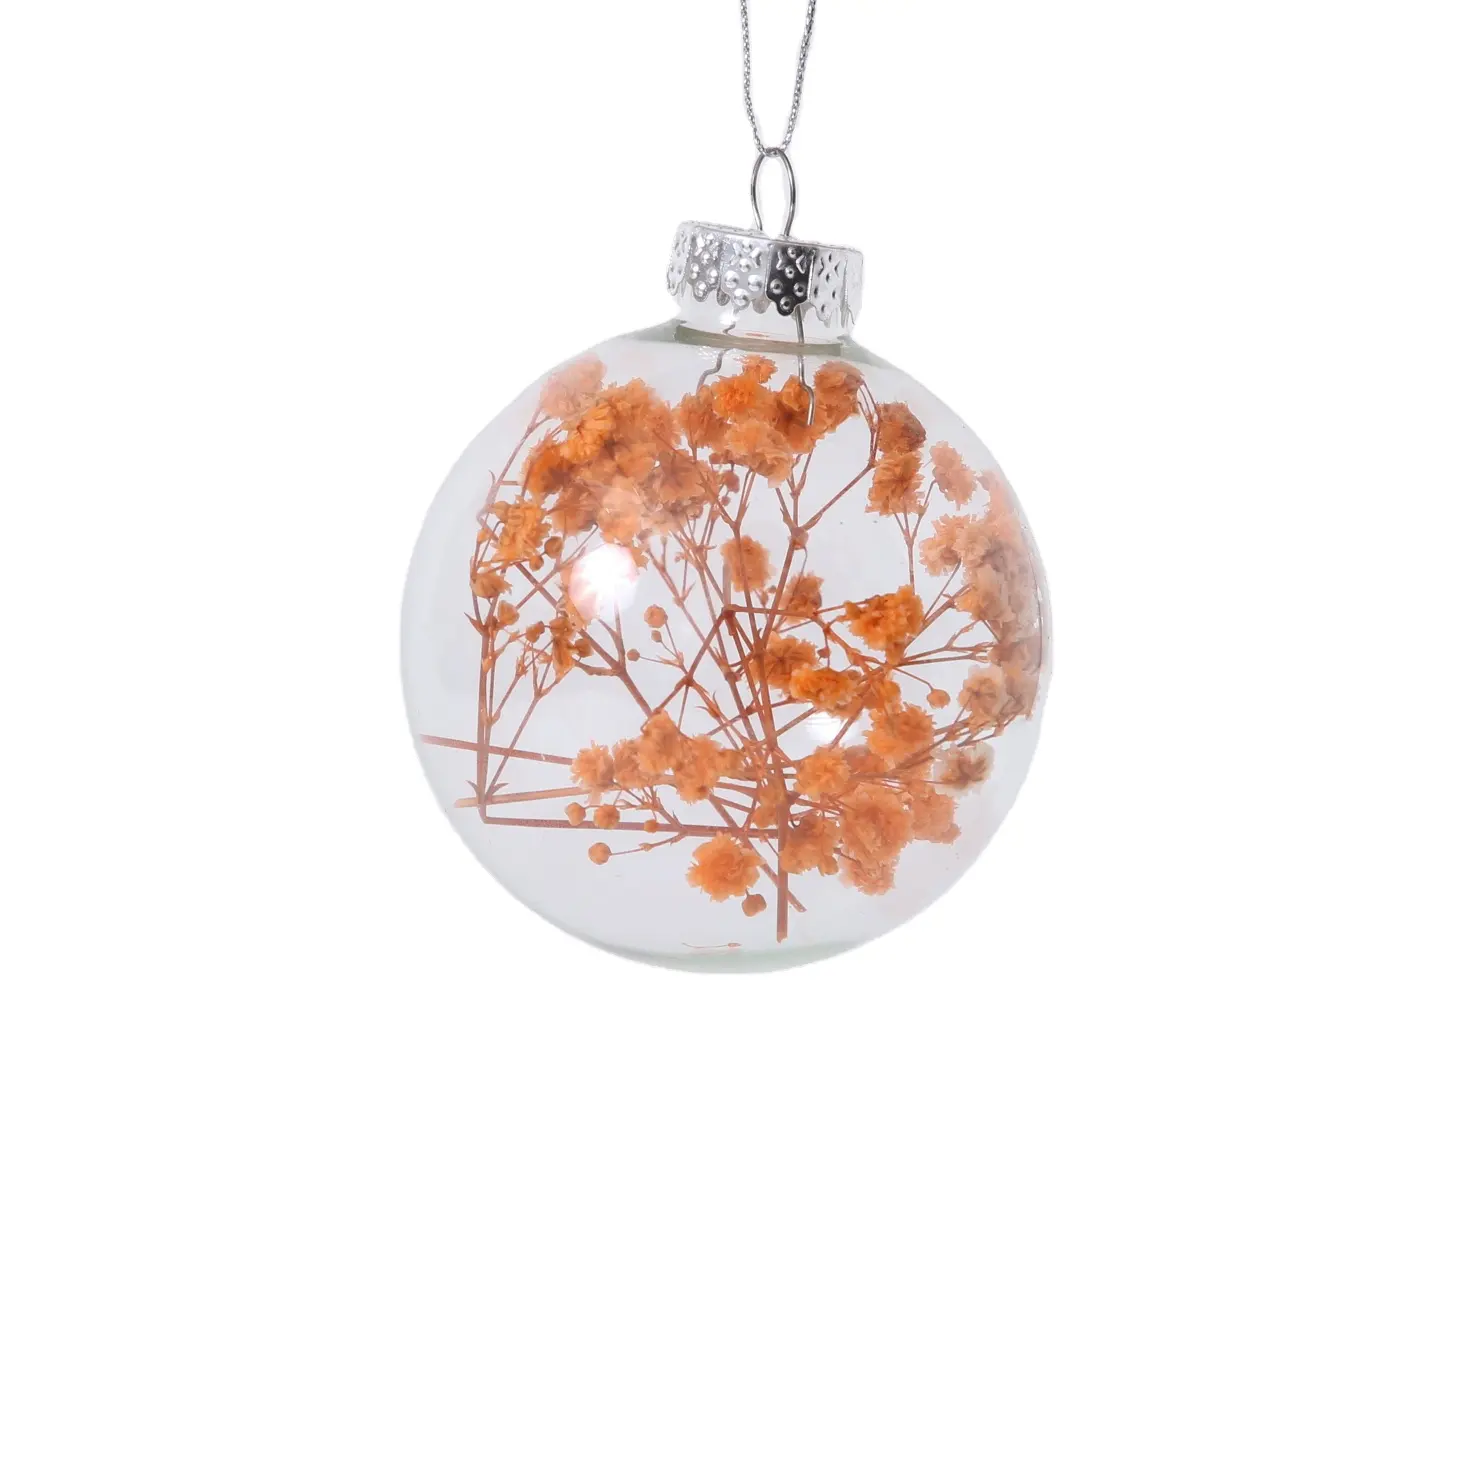 Christmas tree party decorations Pendant home decorations Glass orb